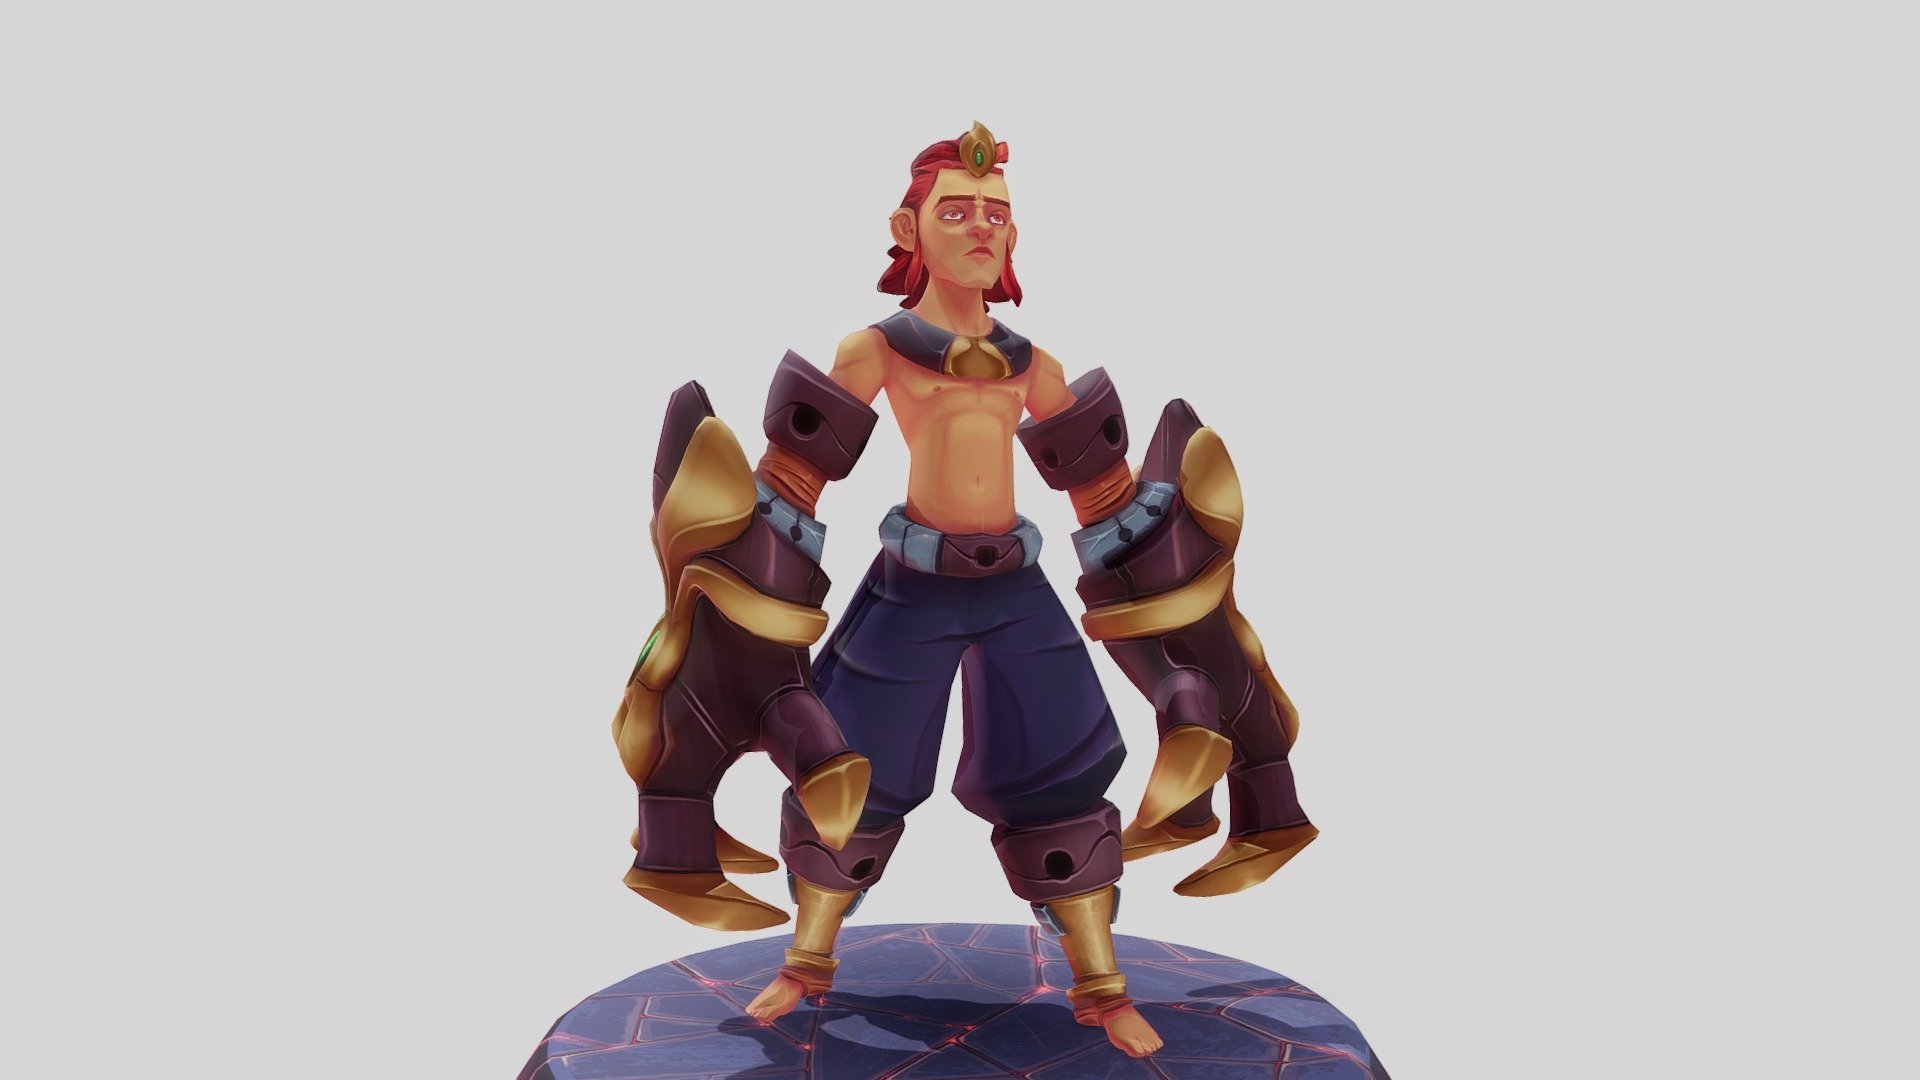 3d model with handpainted texture made for Cubebrush Artwar.

(Note: The current version is a reworked one with newer textures and a little Idle animation) 3d model